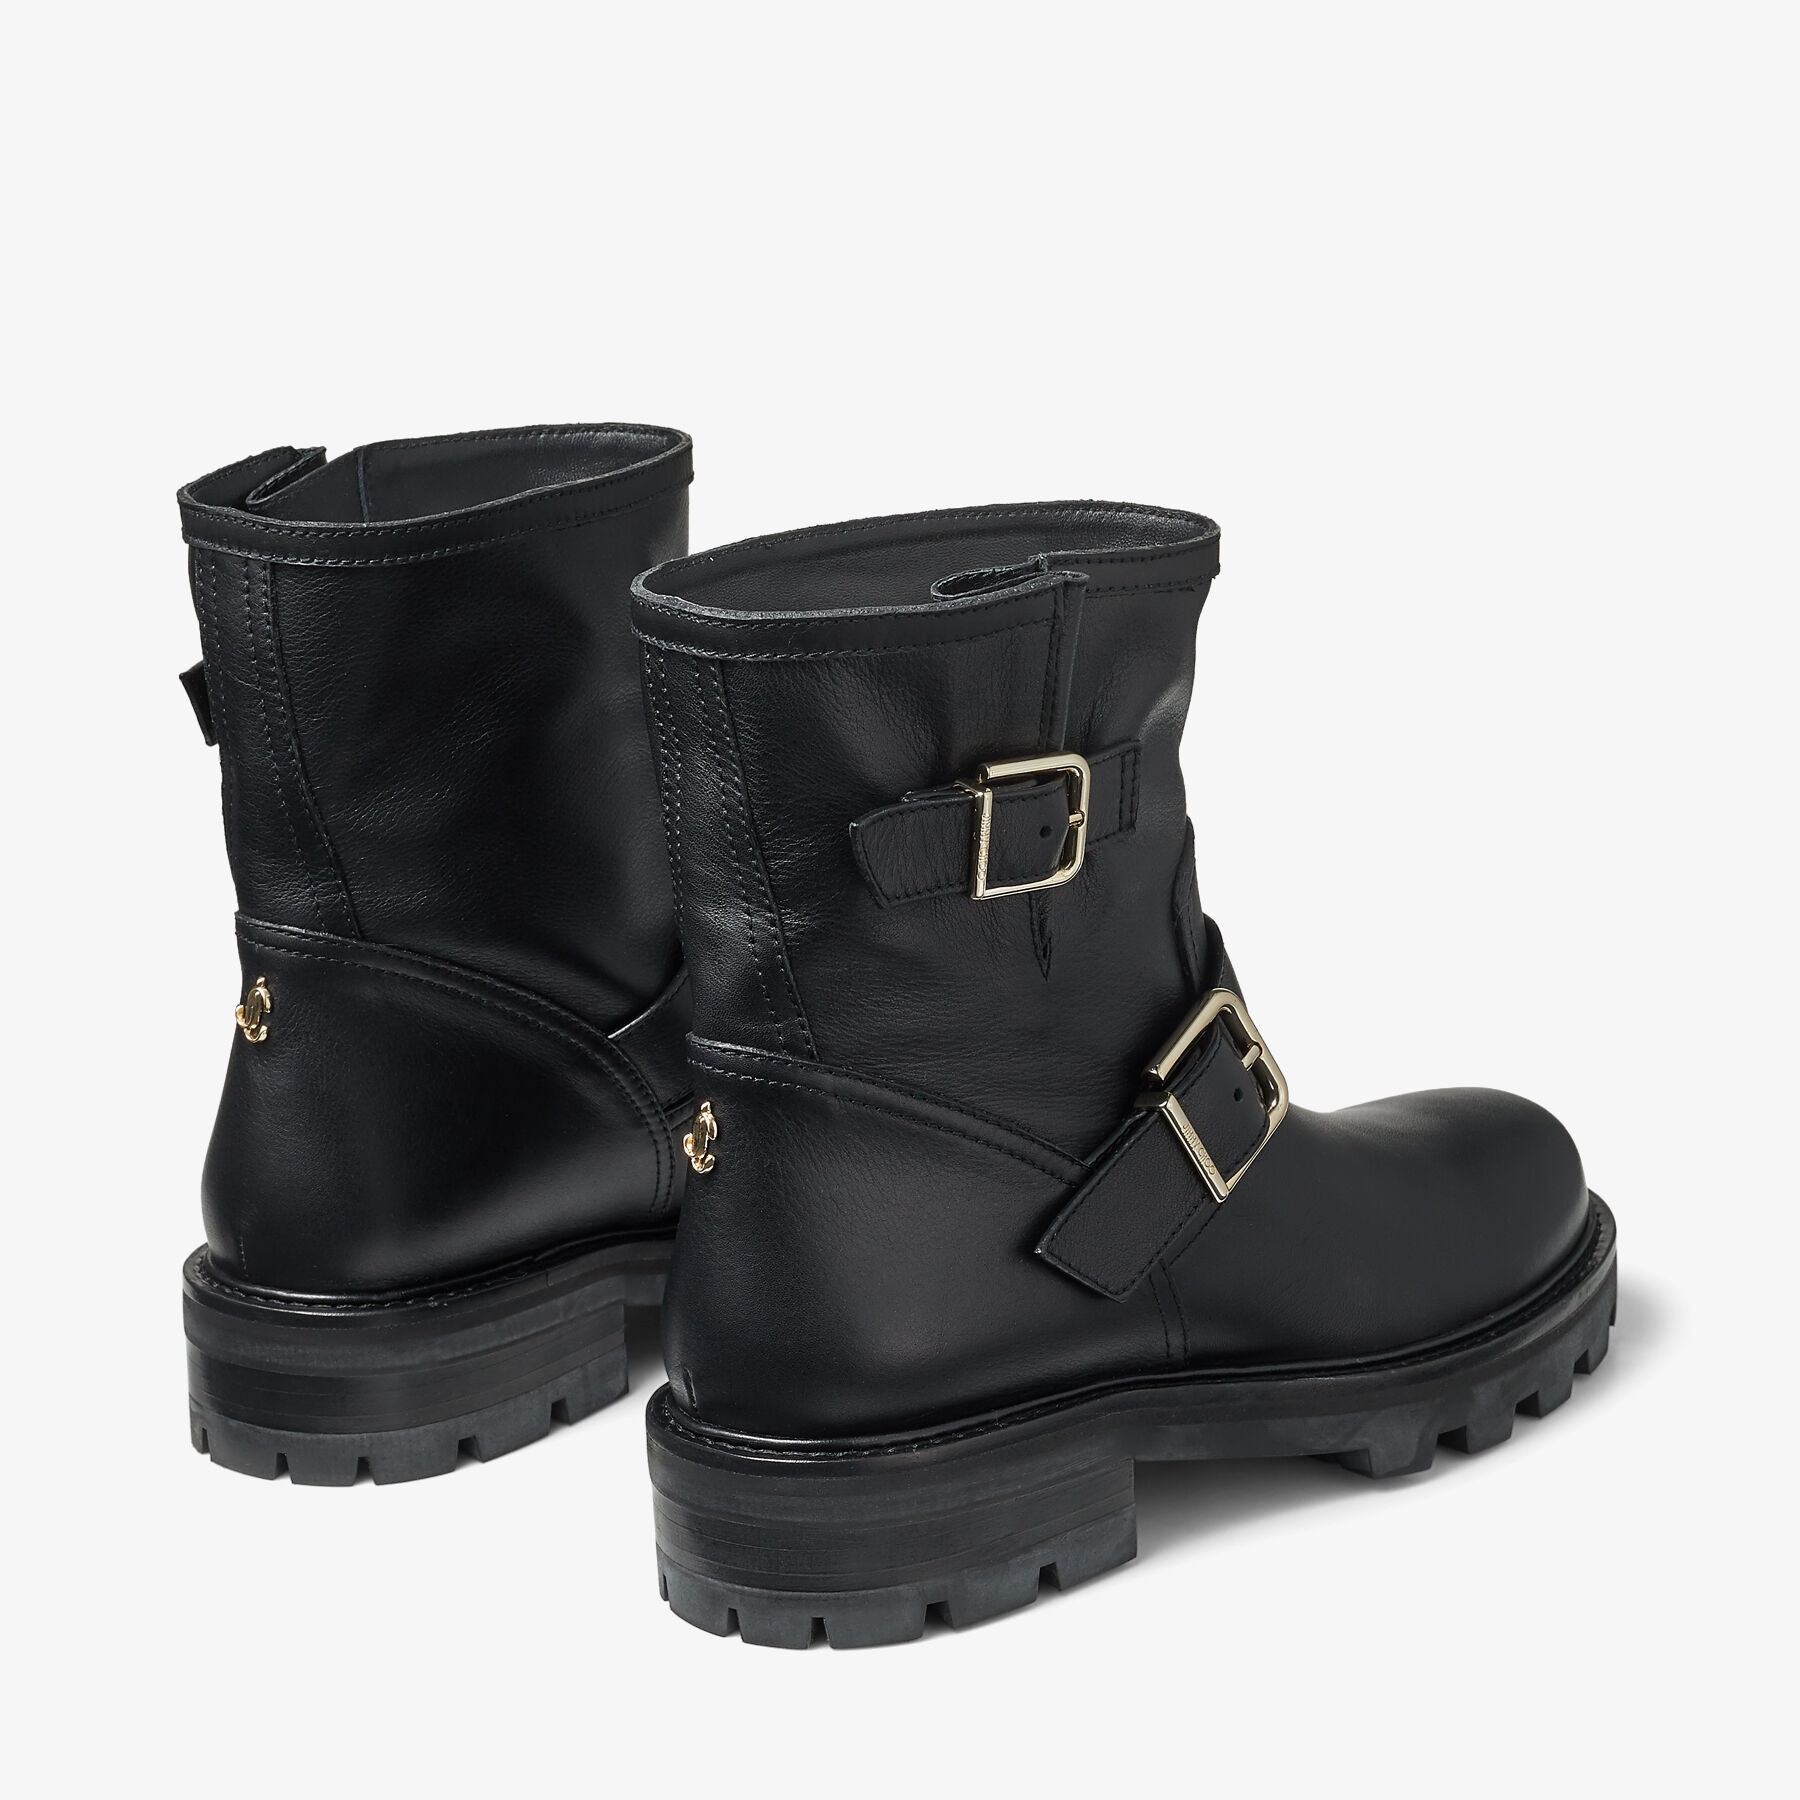 Youth II
Black Smooth Leather Biker Boots with Gold Buckles - 5